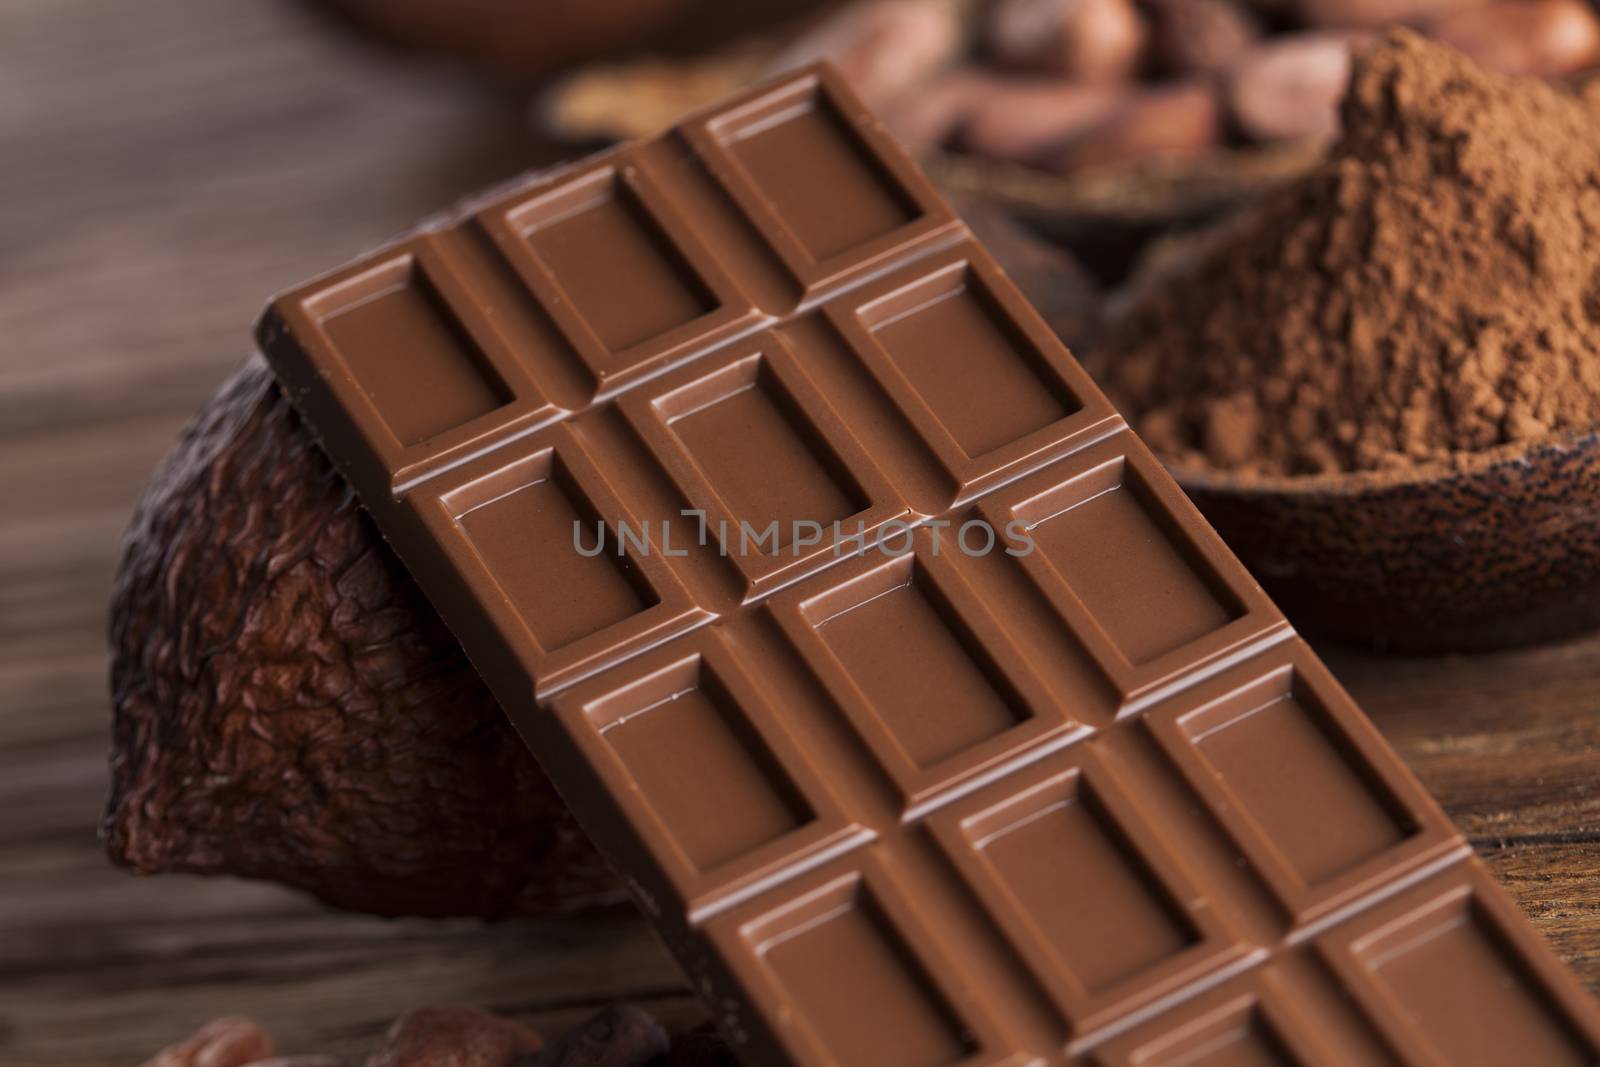 Chocolate bar, candy sweet, cacao beans and powder on wooden background